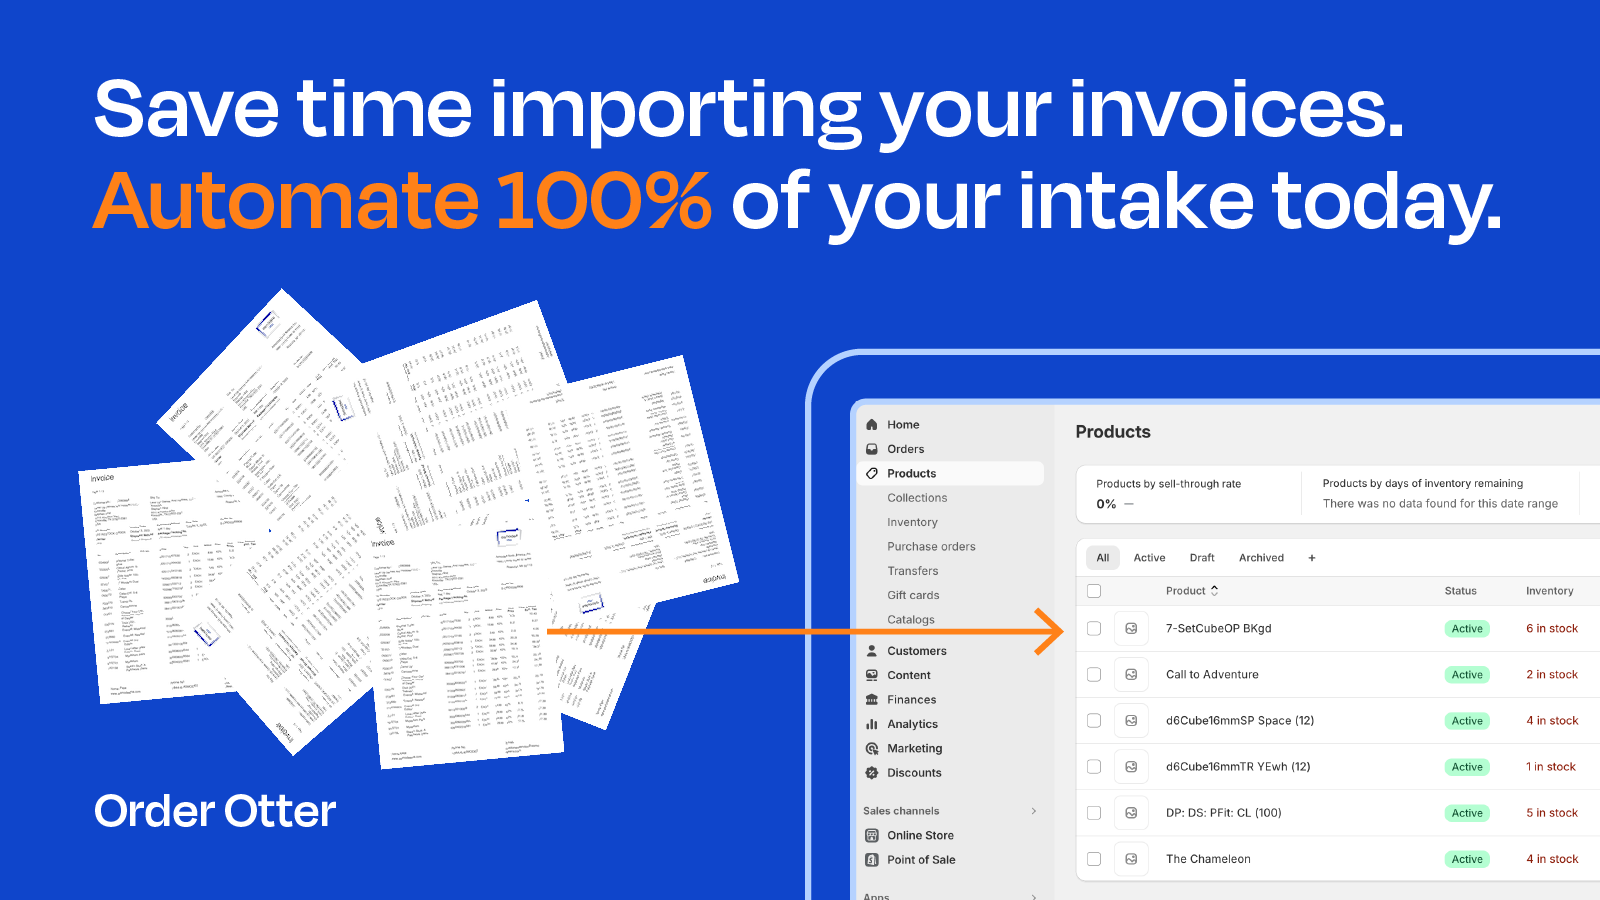 Save time importing your invoices.